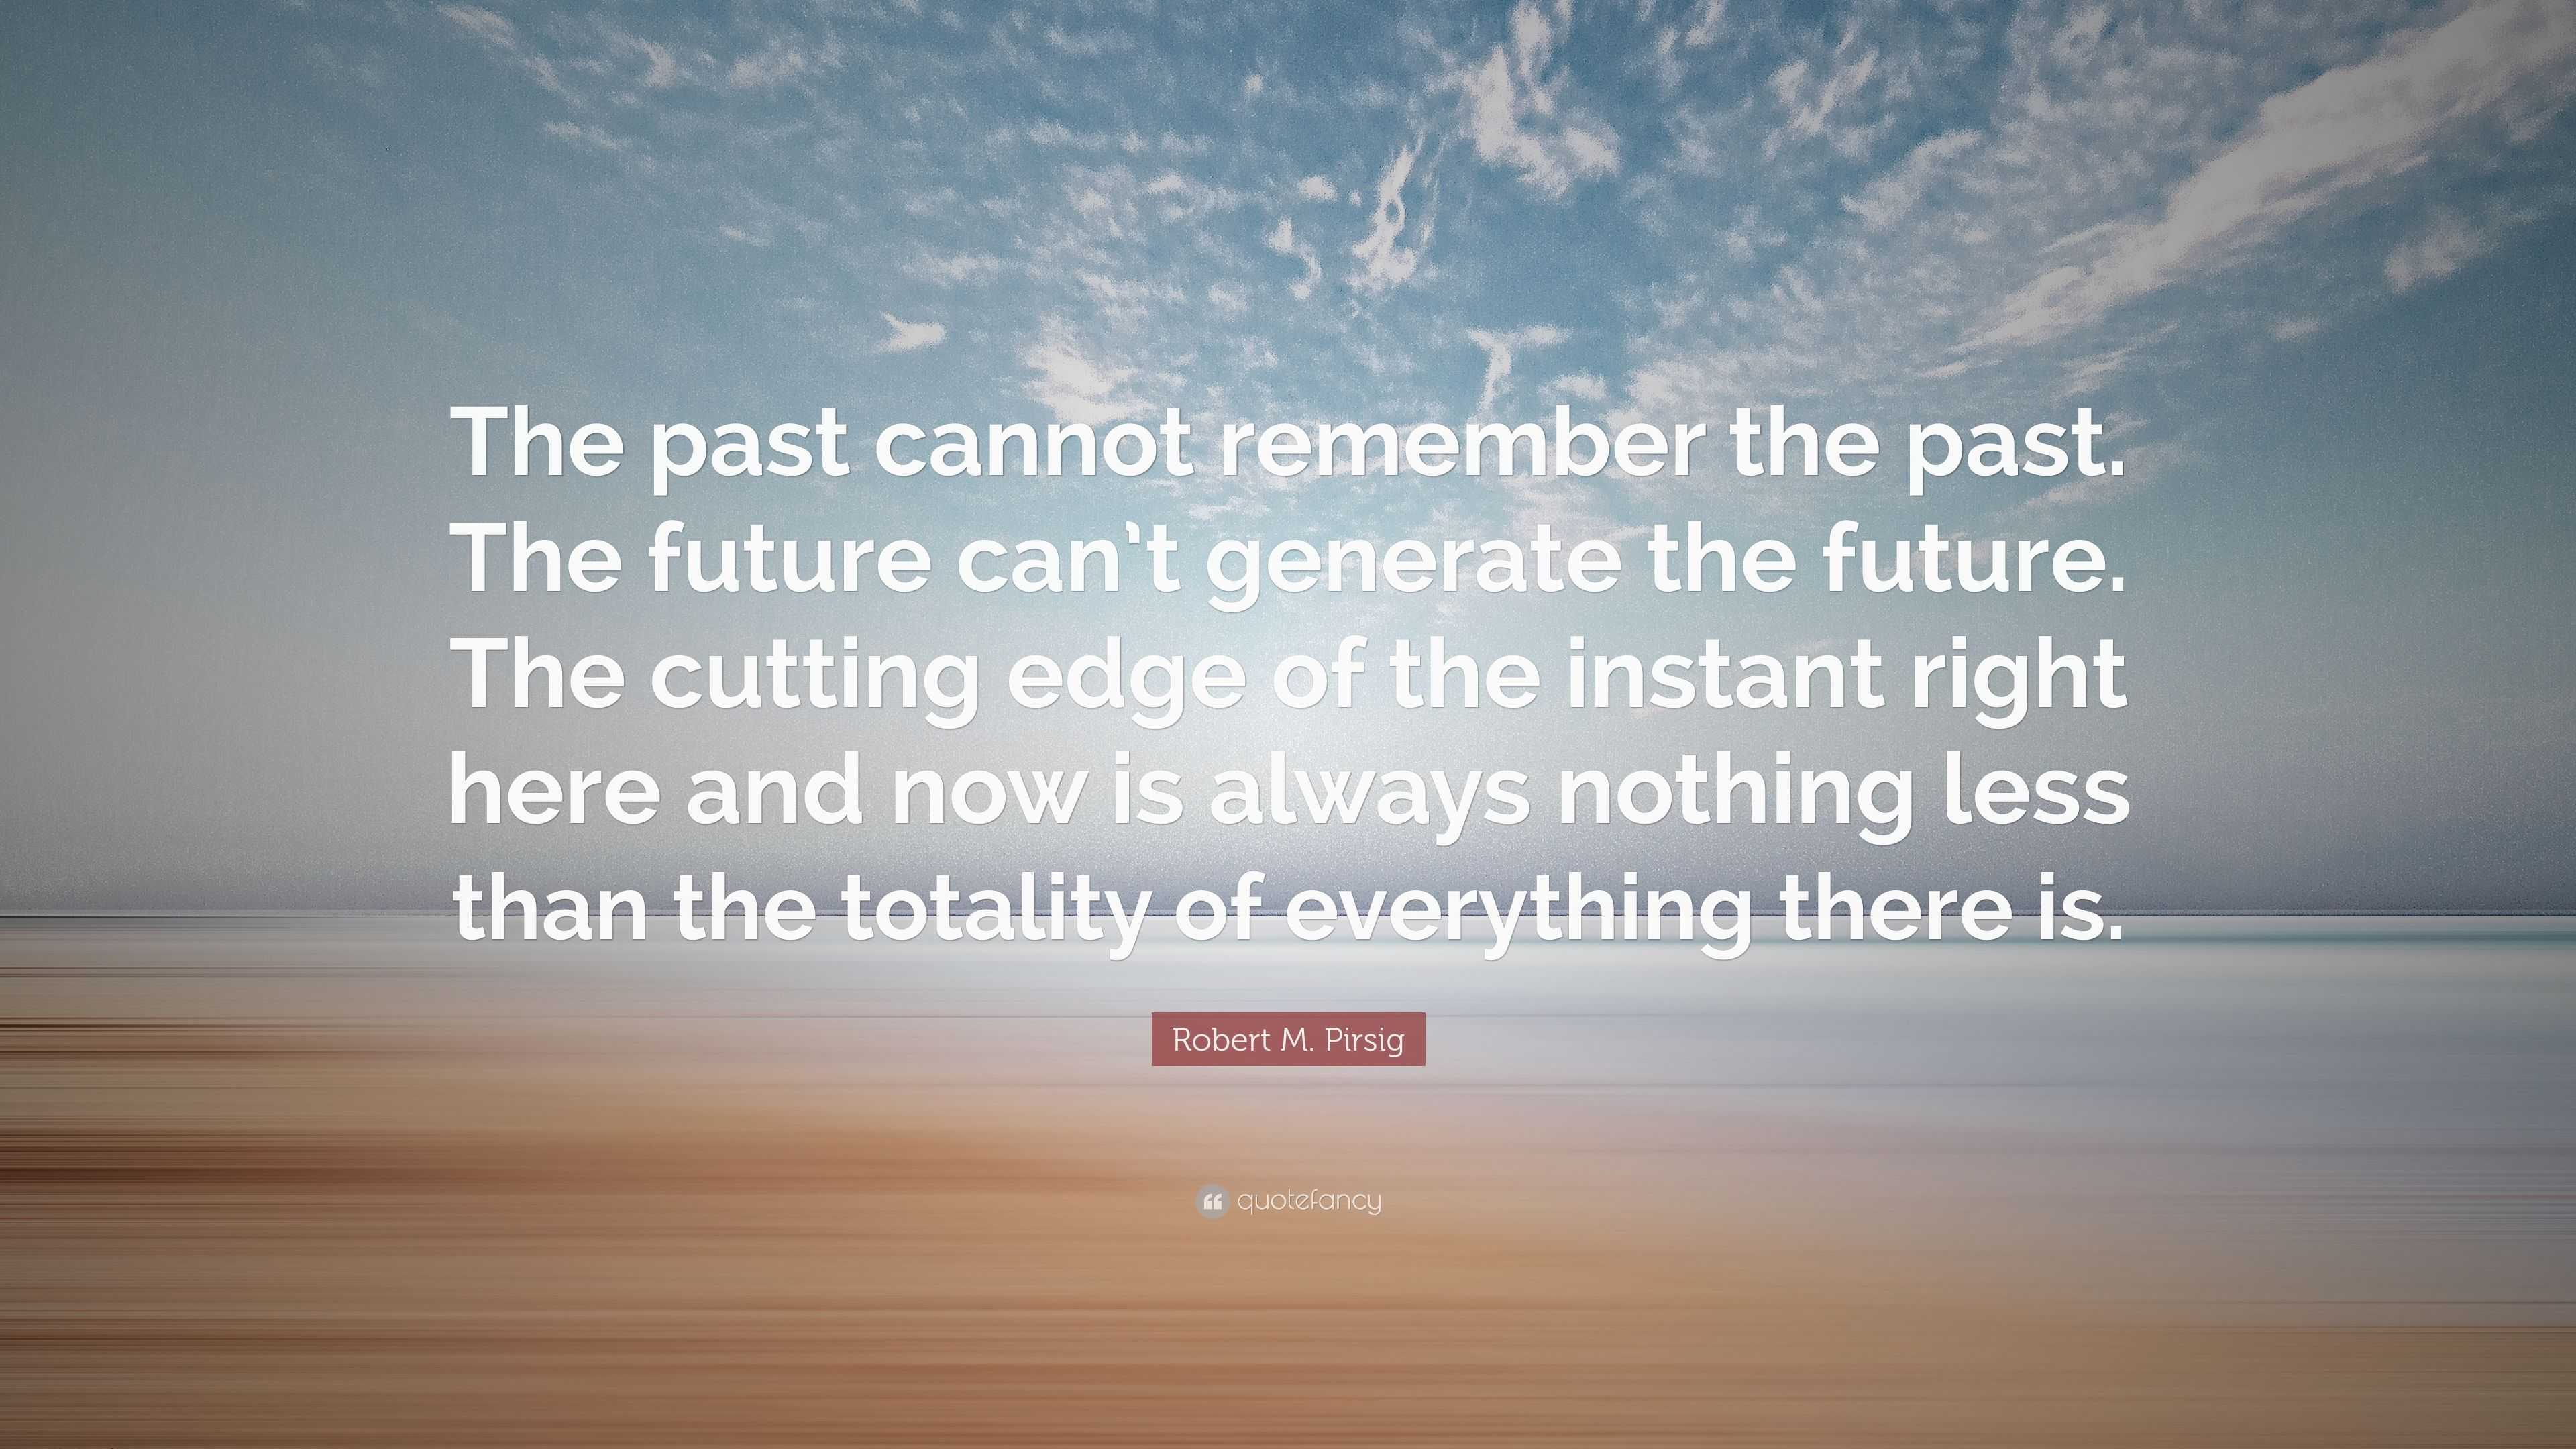 Robert M. Pirsig Quote: “The past cannot remember the past. The future ...